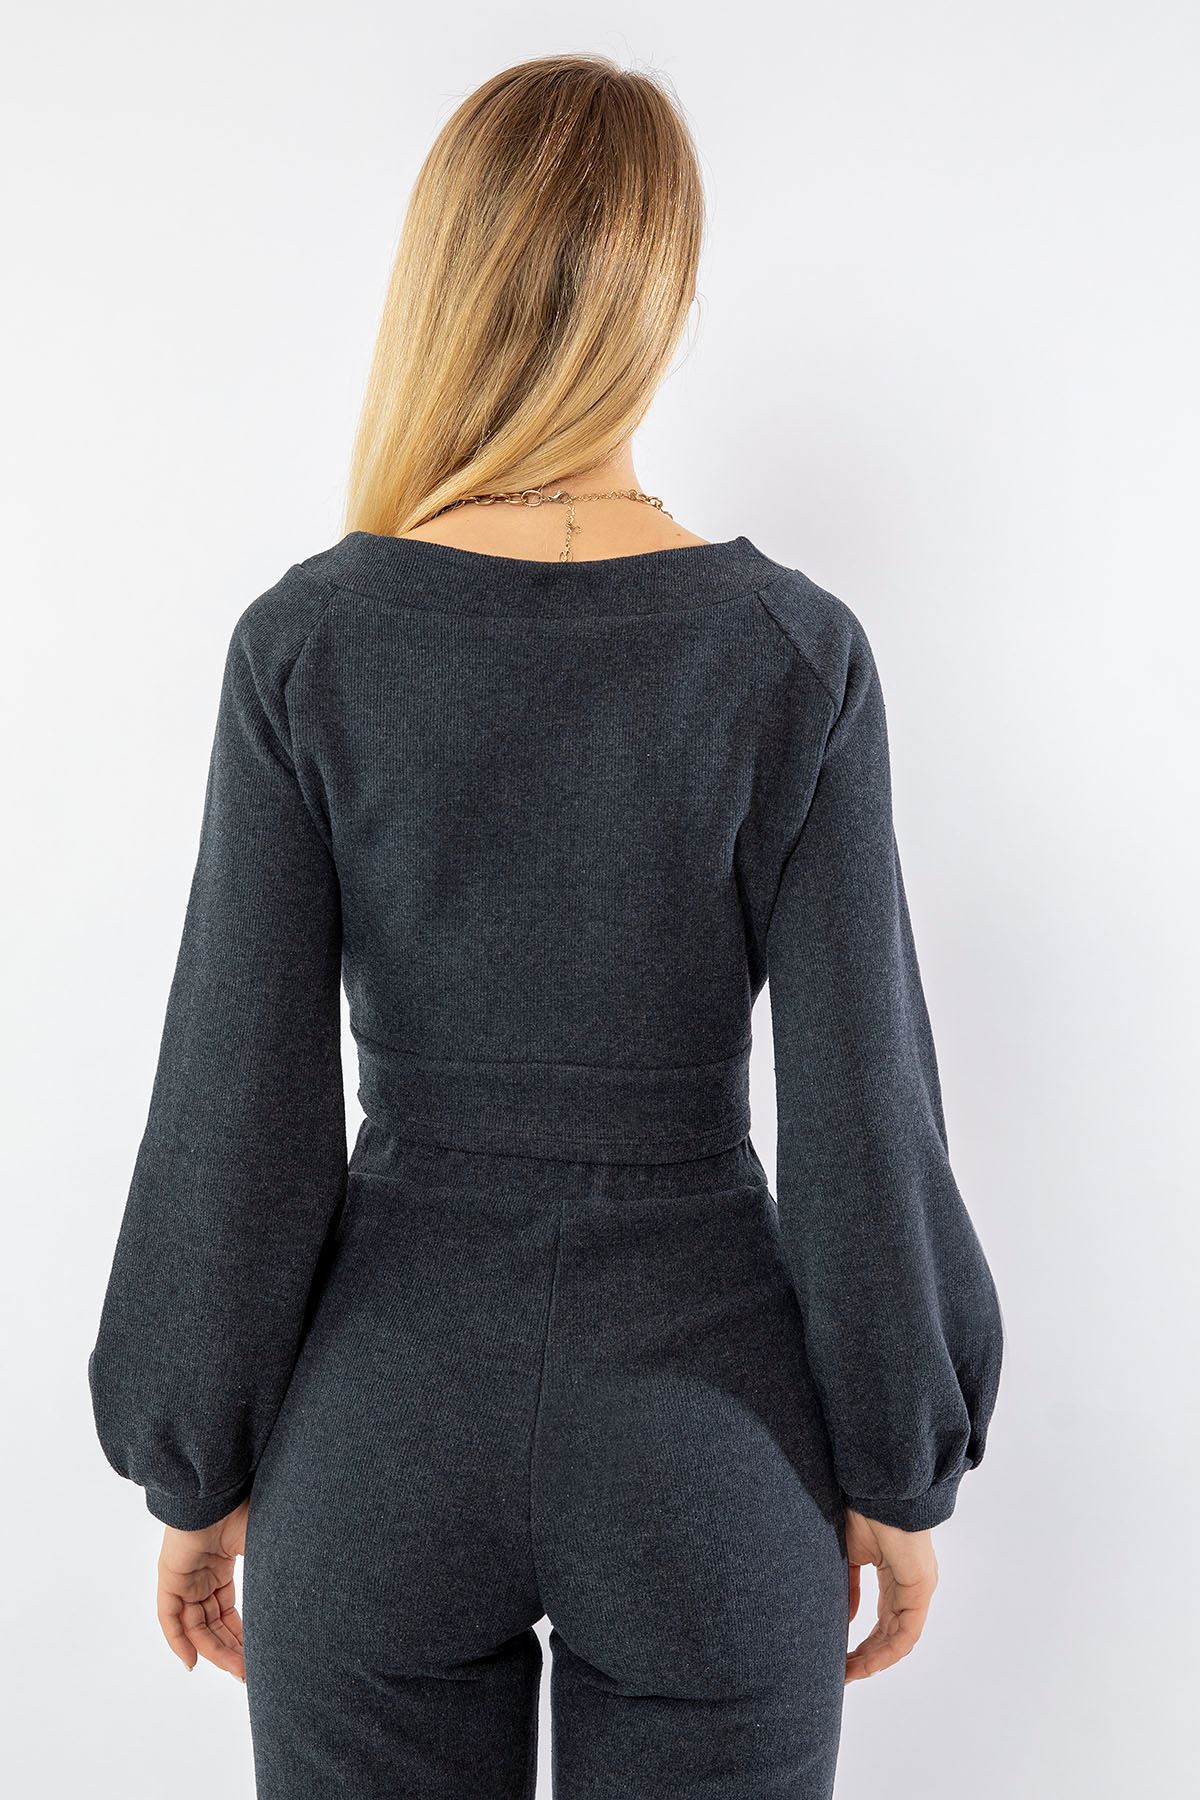 Thessaloniki Knitted Fabric Long Sleeve V-Neck Blouse - Anthracite 